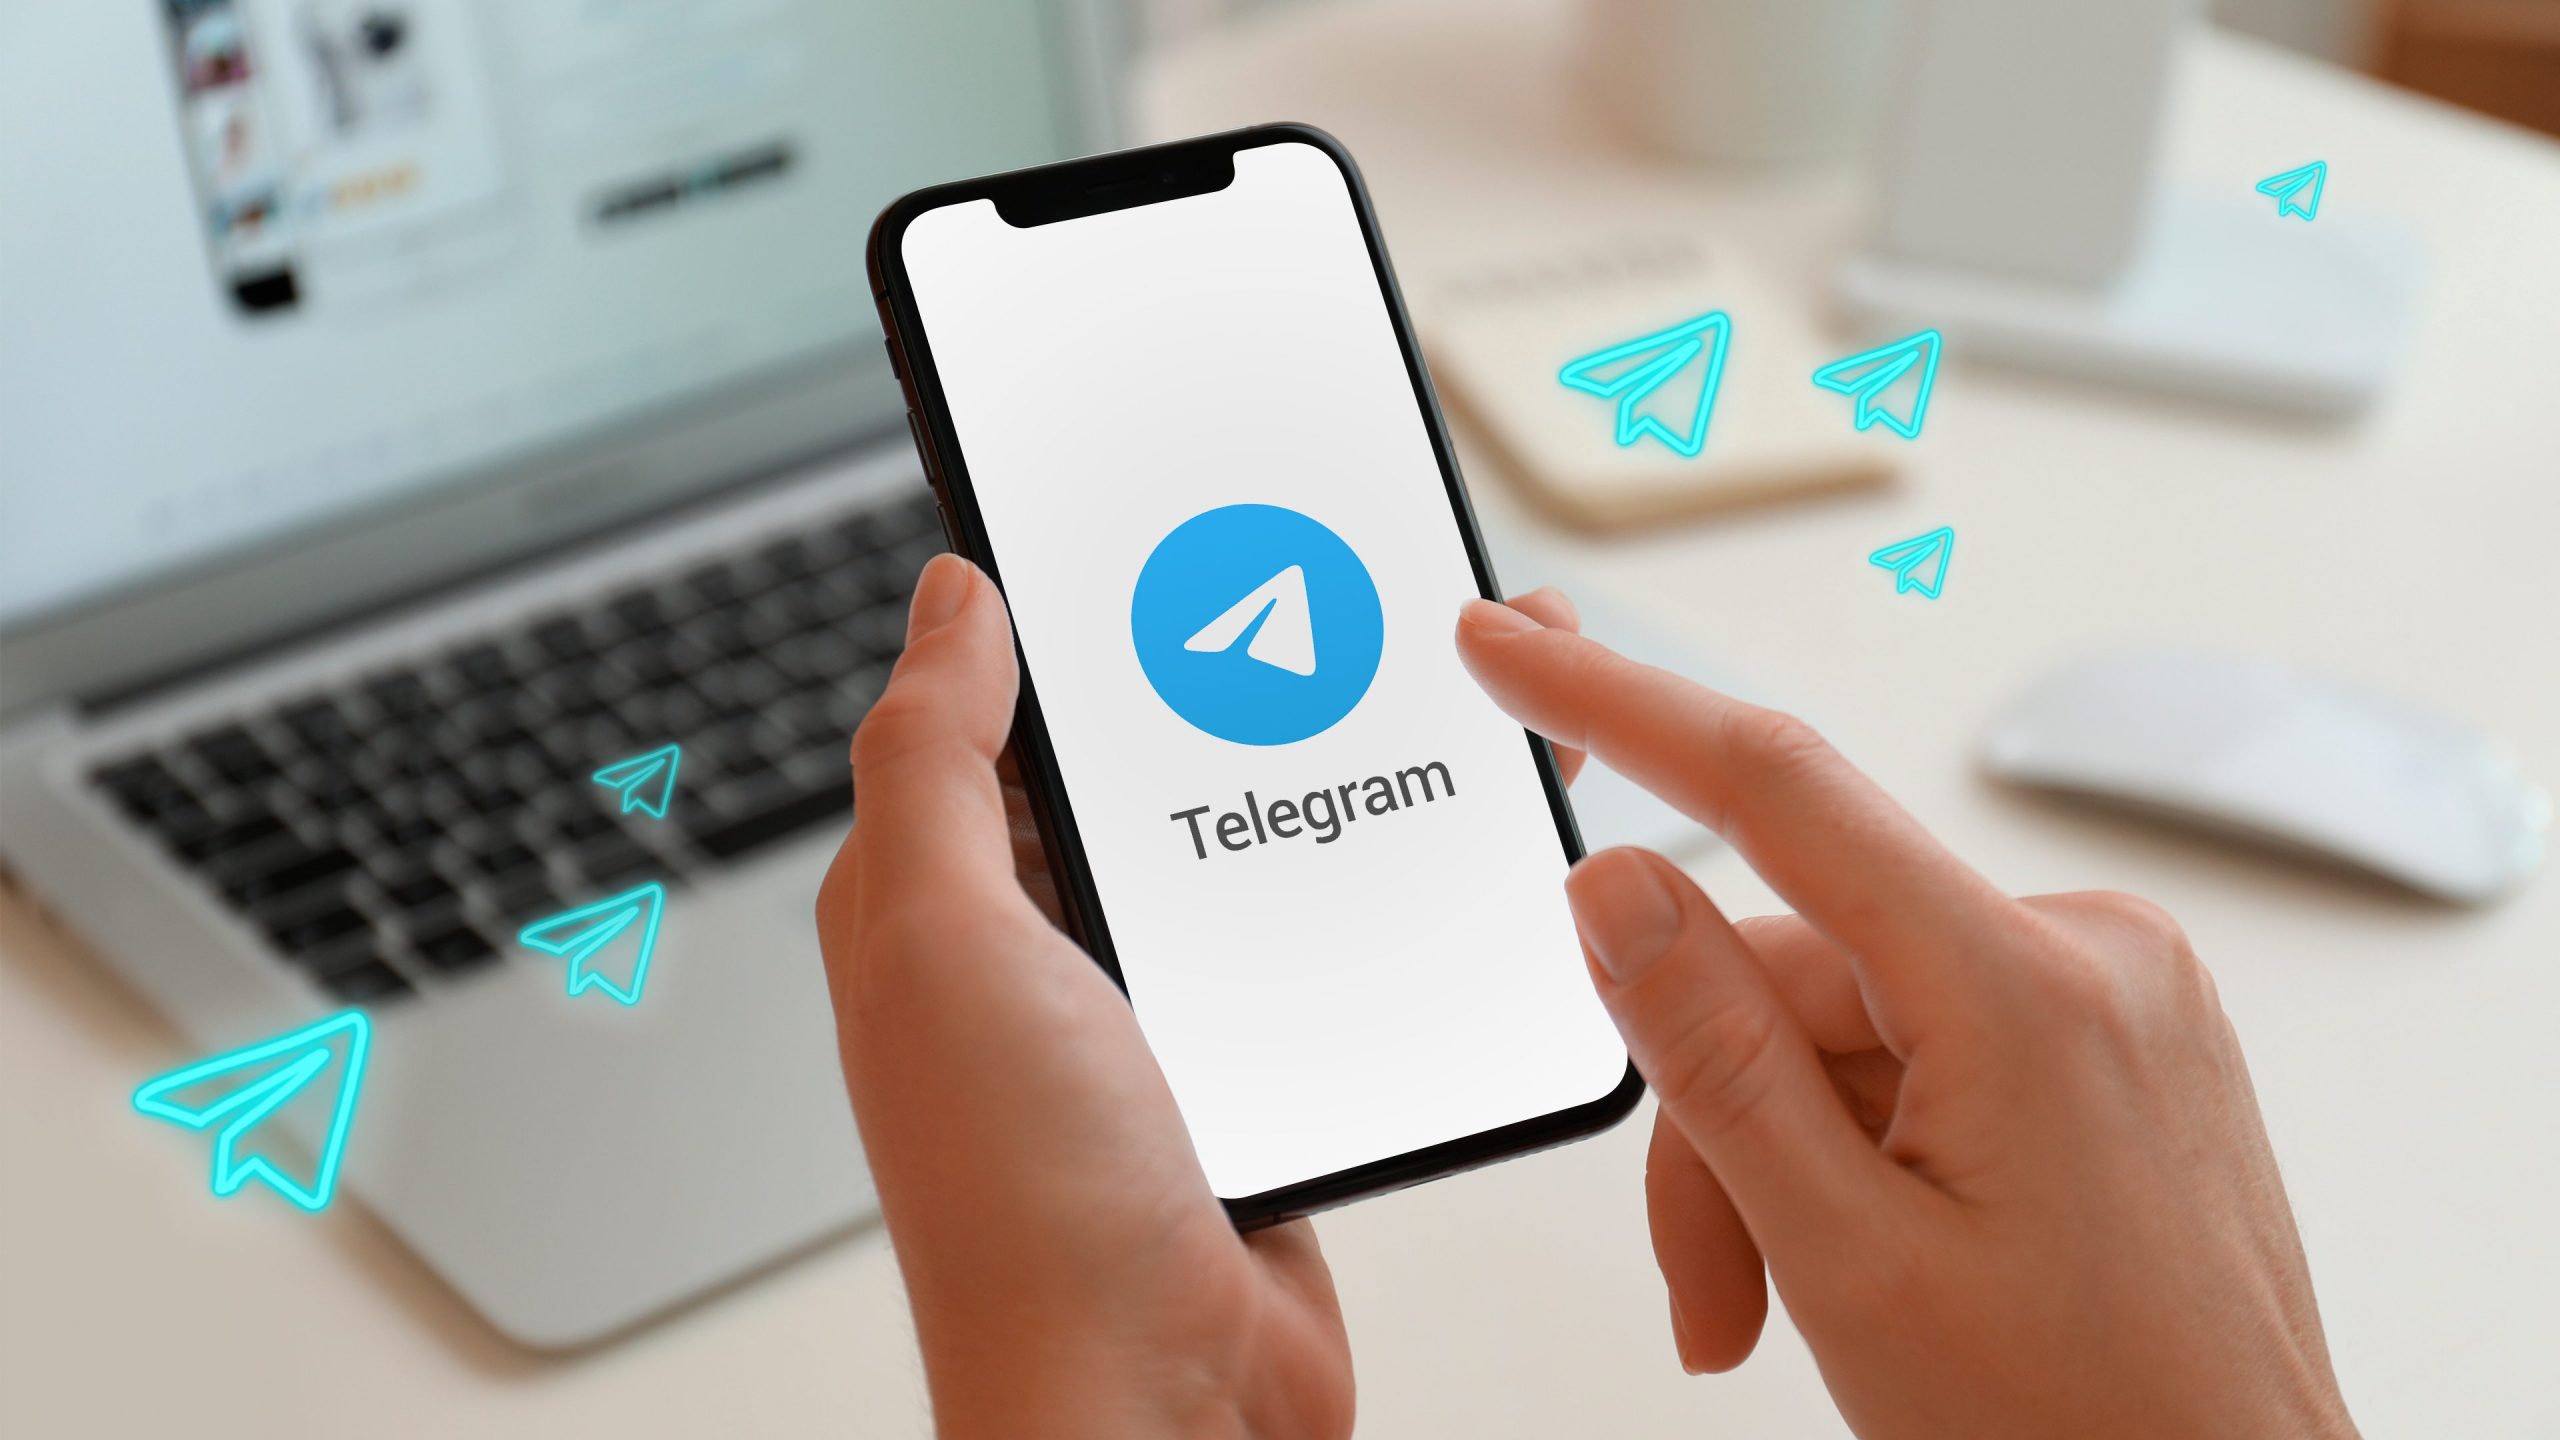 Telegram Embraces The Super App Model, Following In WeChat’s Footsteps